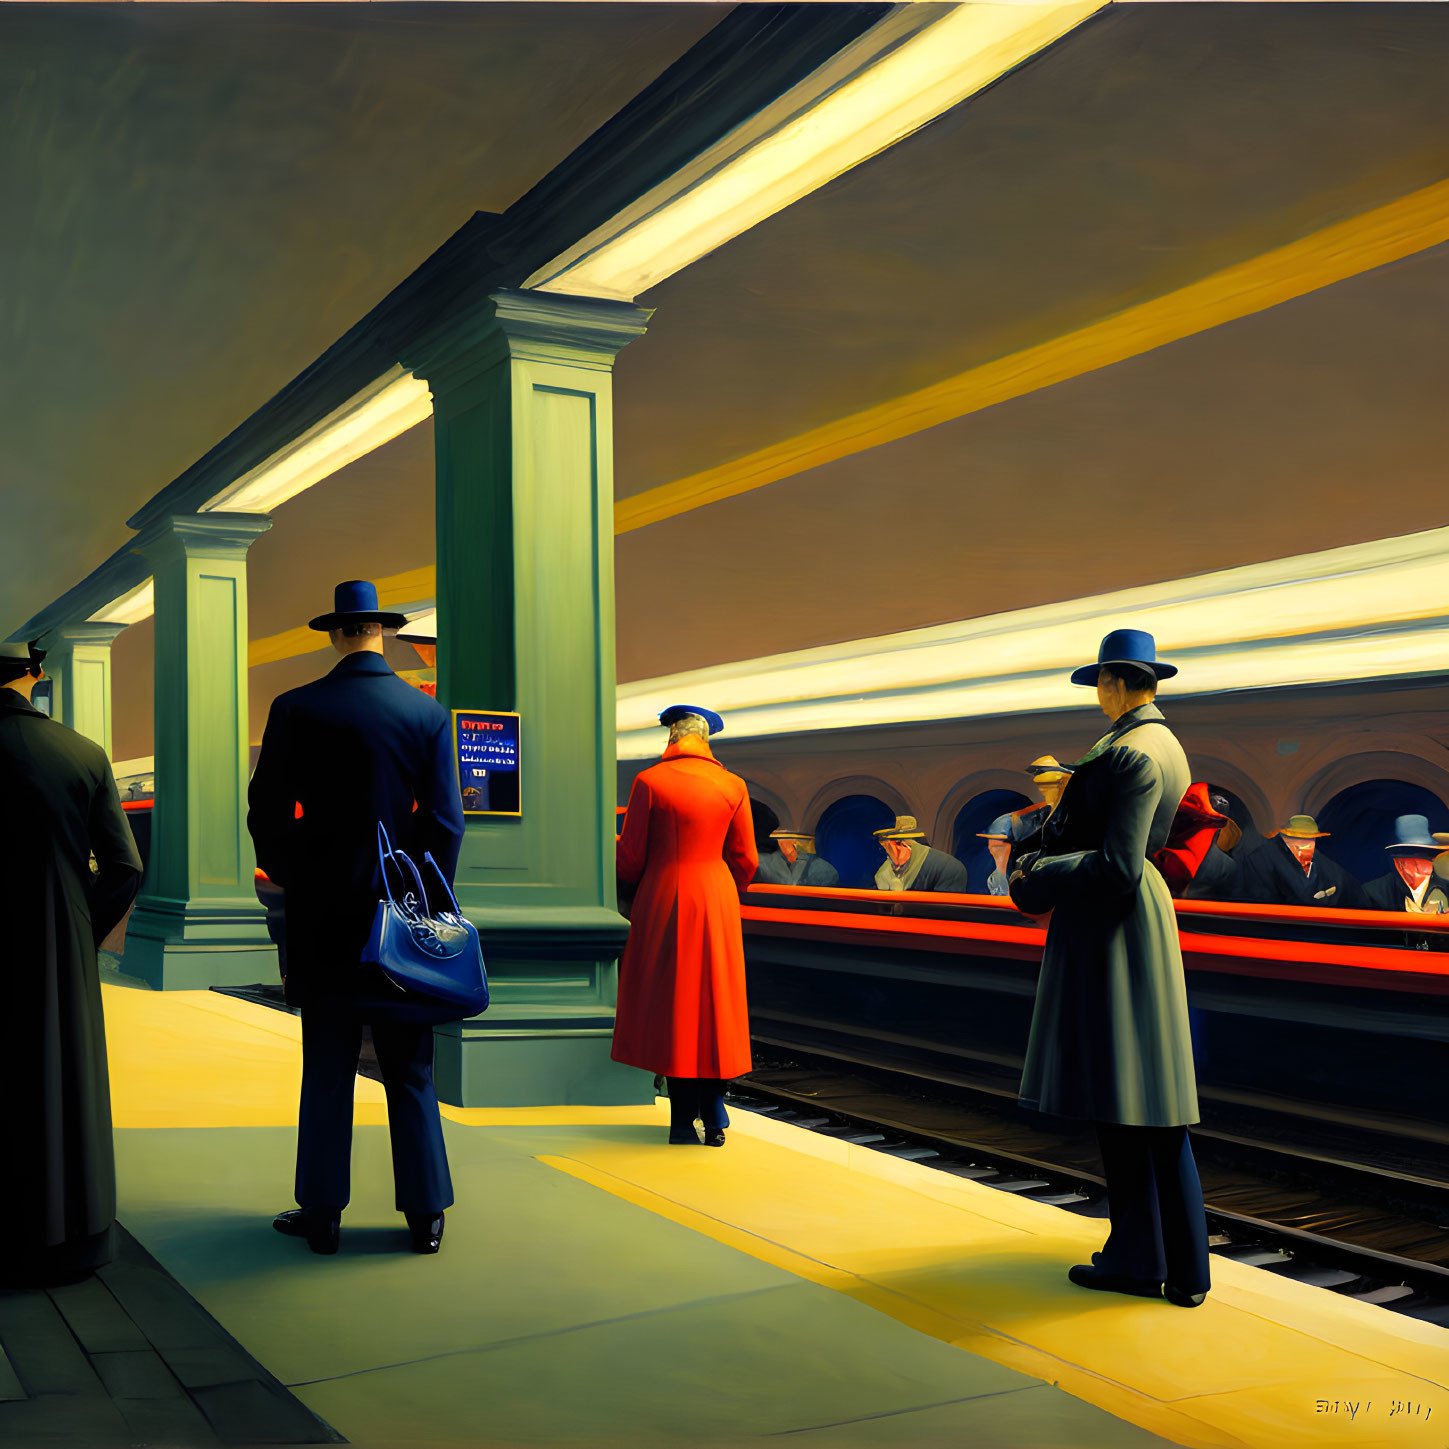 Vibrant painting of people on train platform with strong light and color contrast